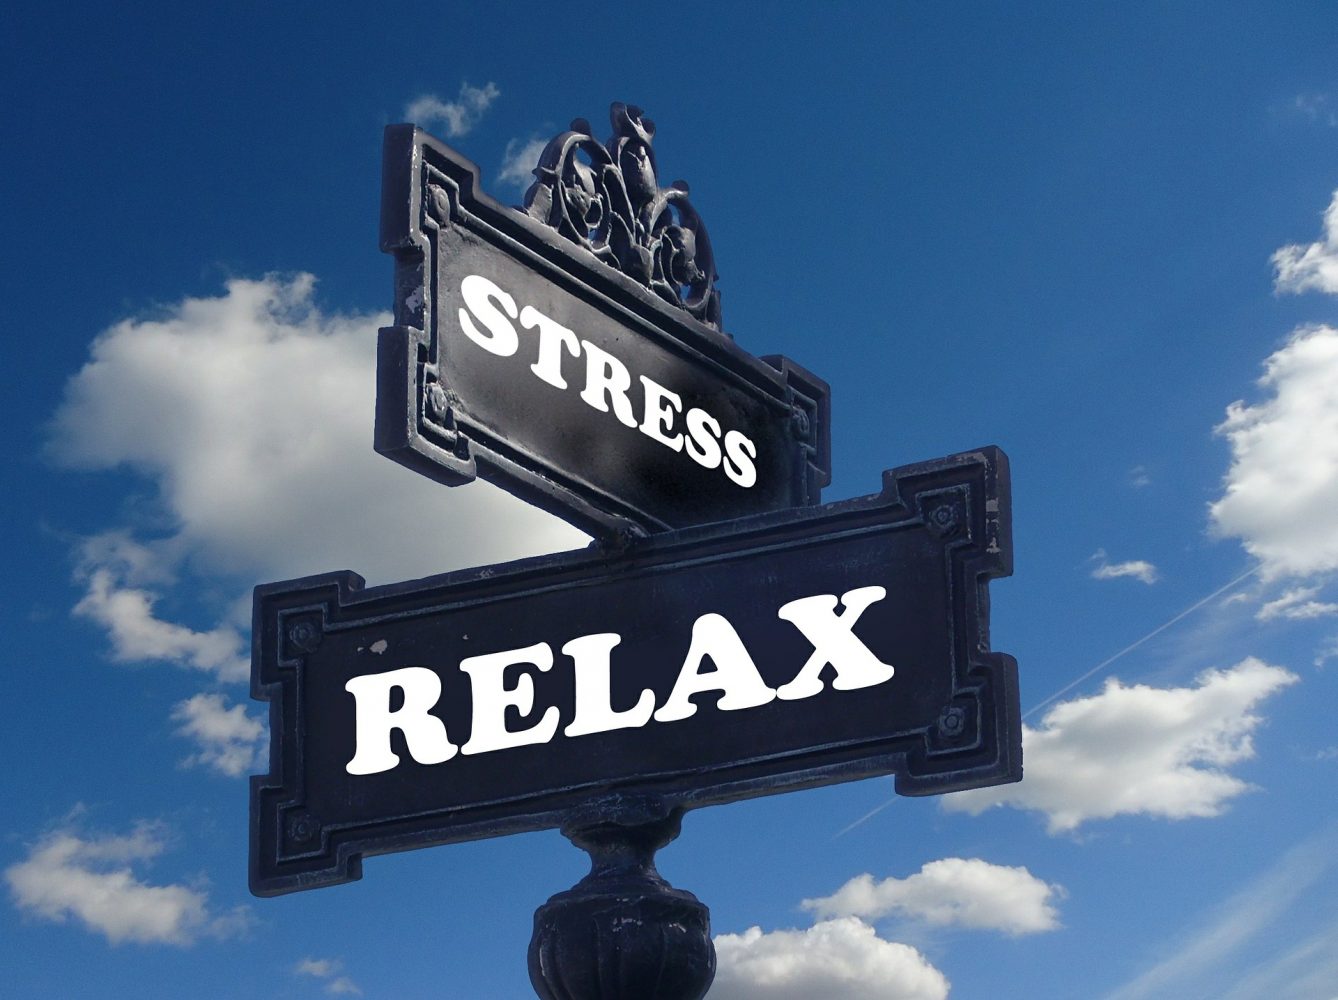 10 Tips to Reduce Stress